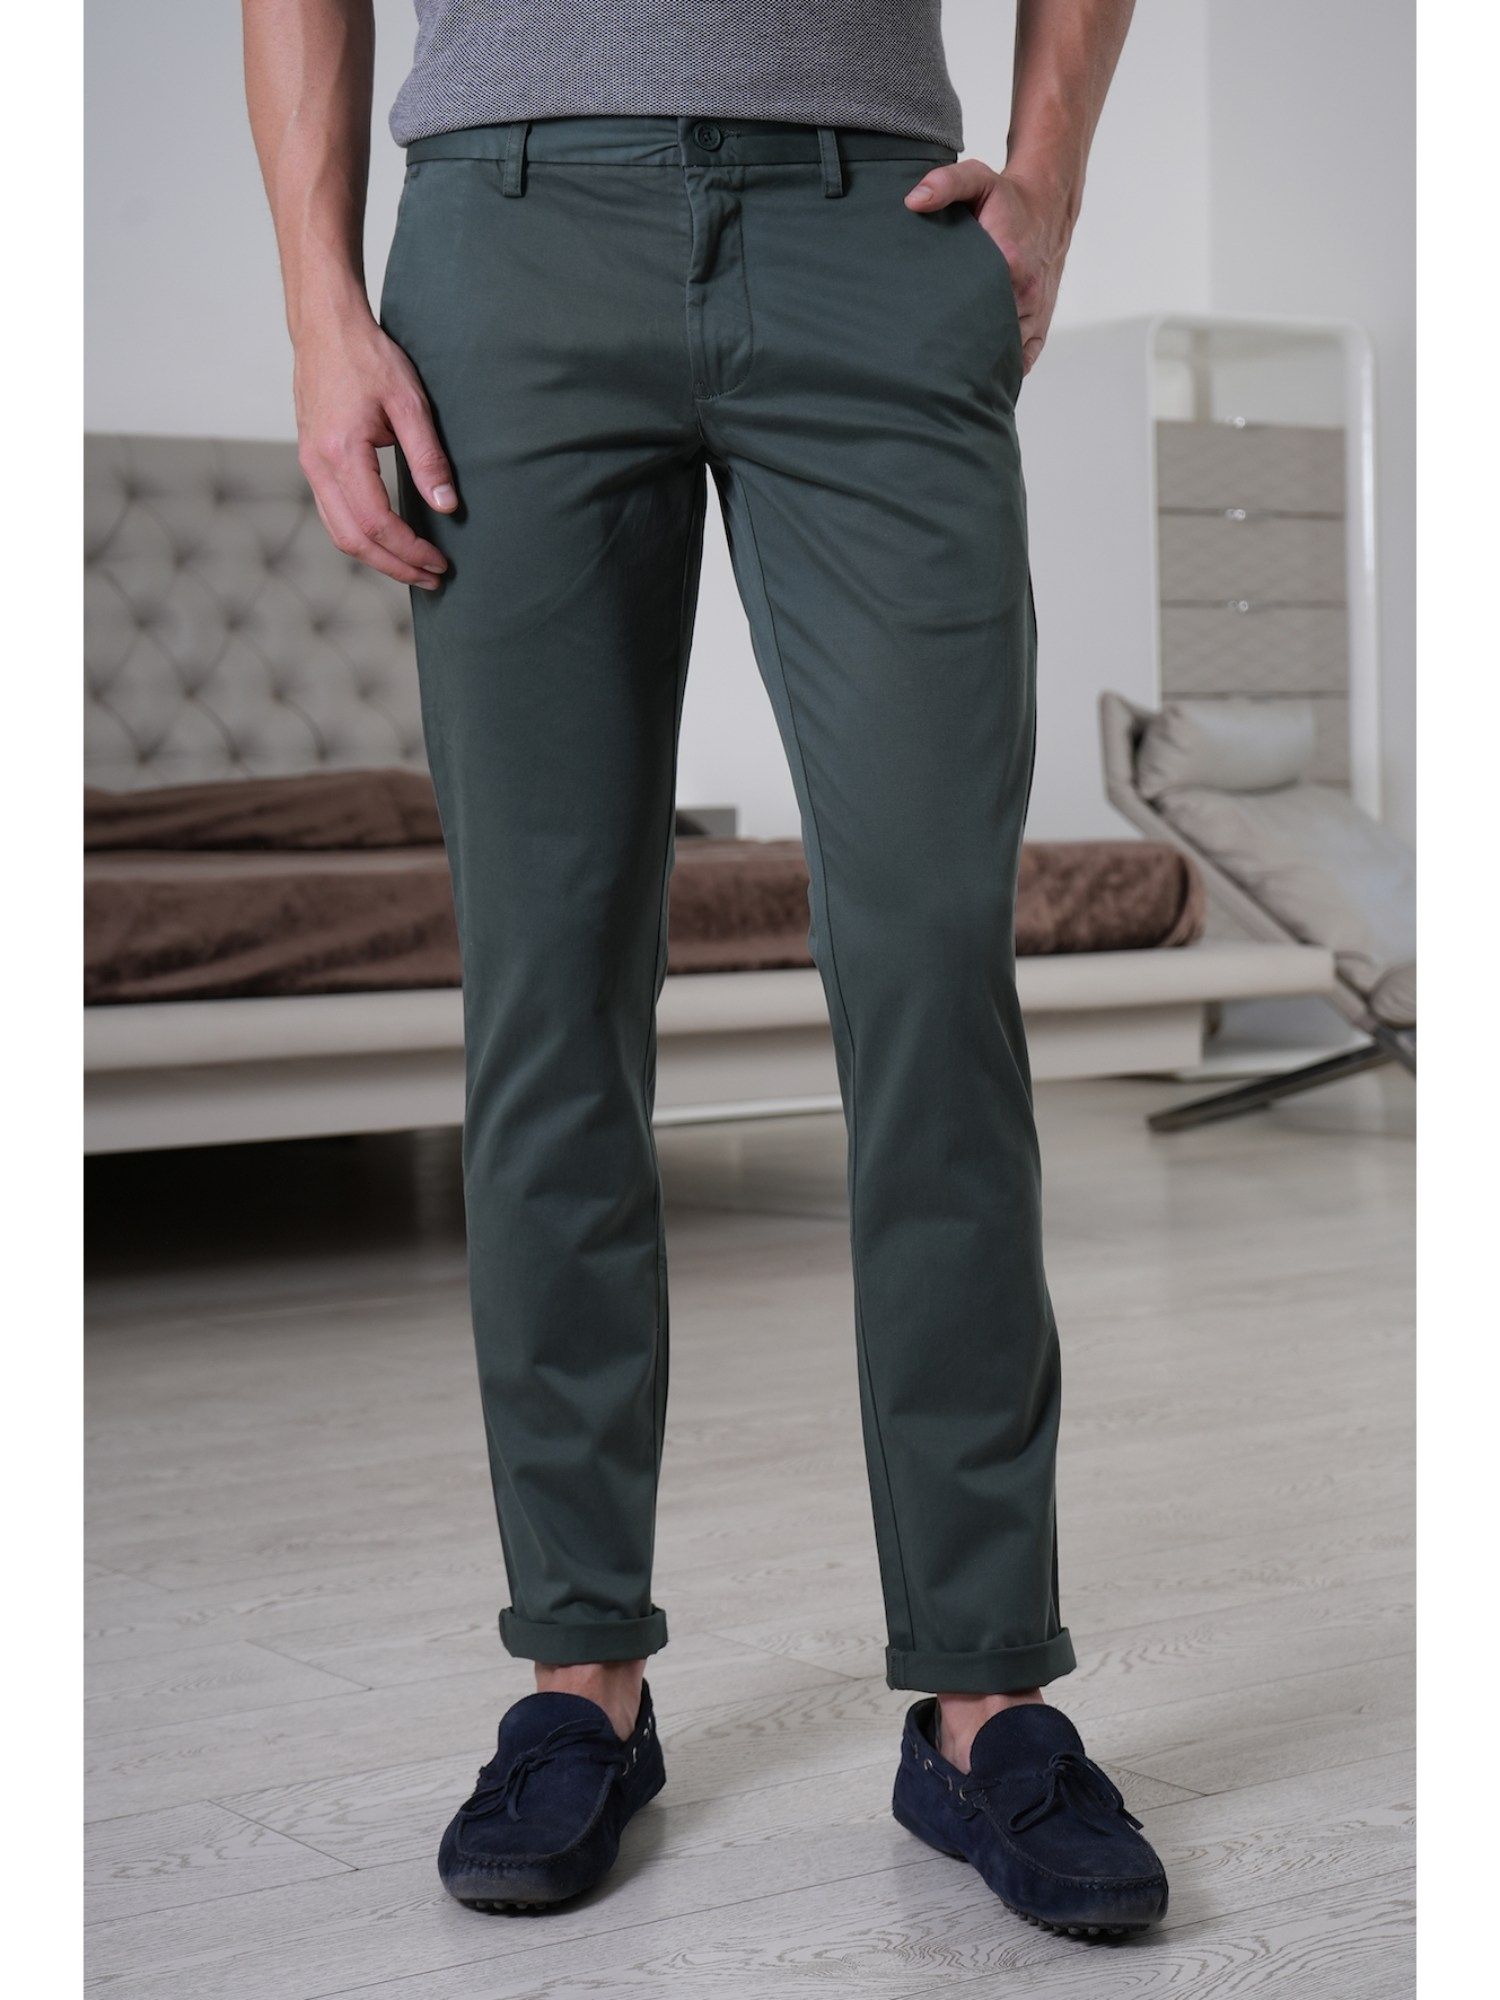 Poe Cotton Trousers - Buy Poe Cotton Trousers online in India